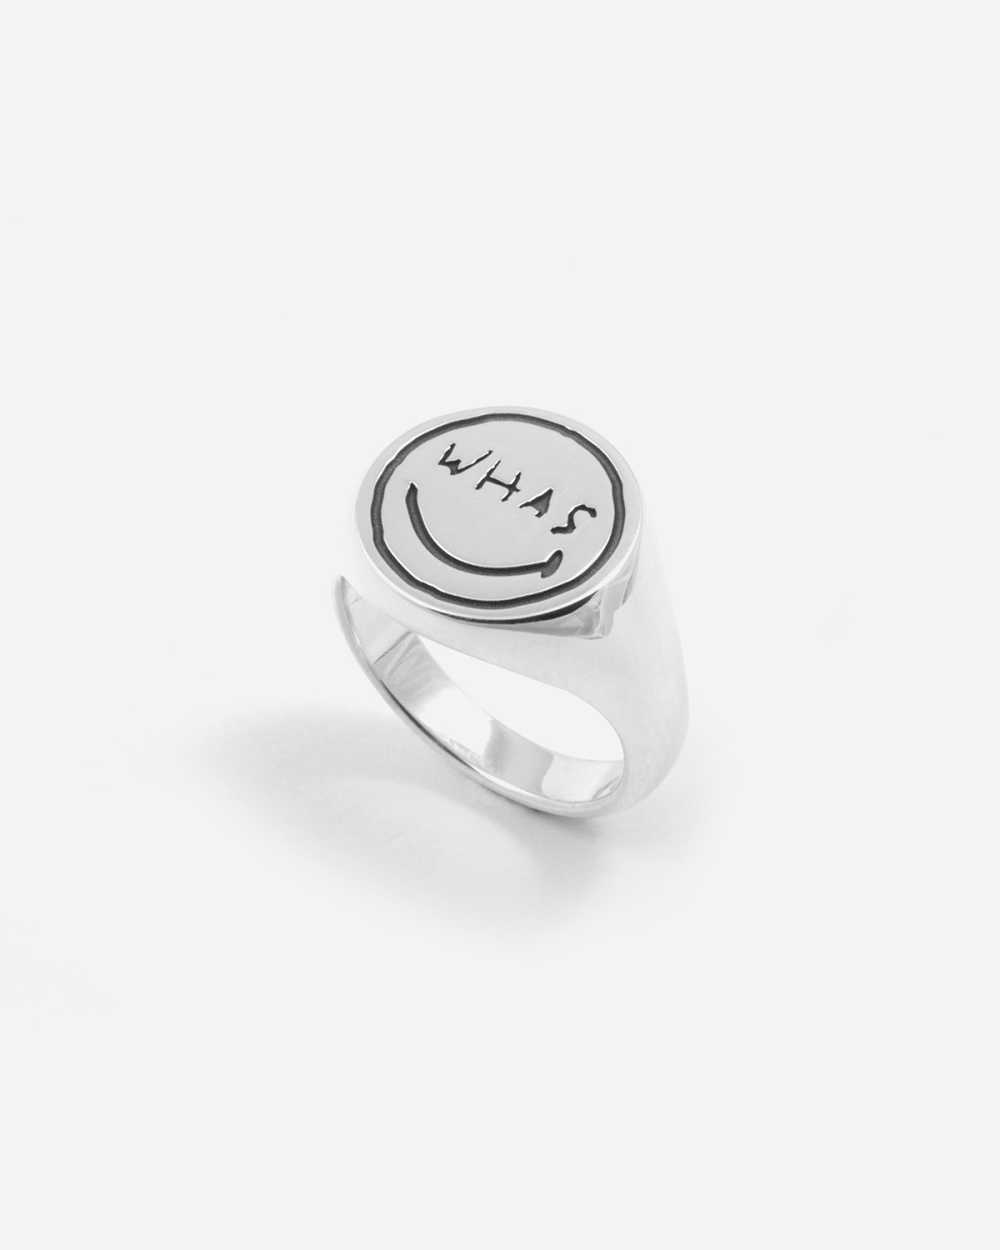 WHAS ROUND SIGNET RING WITH ENGRAVING